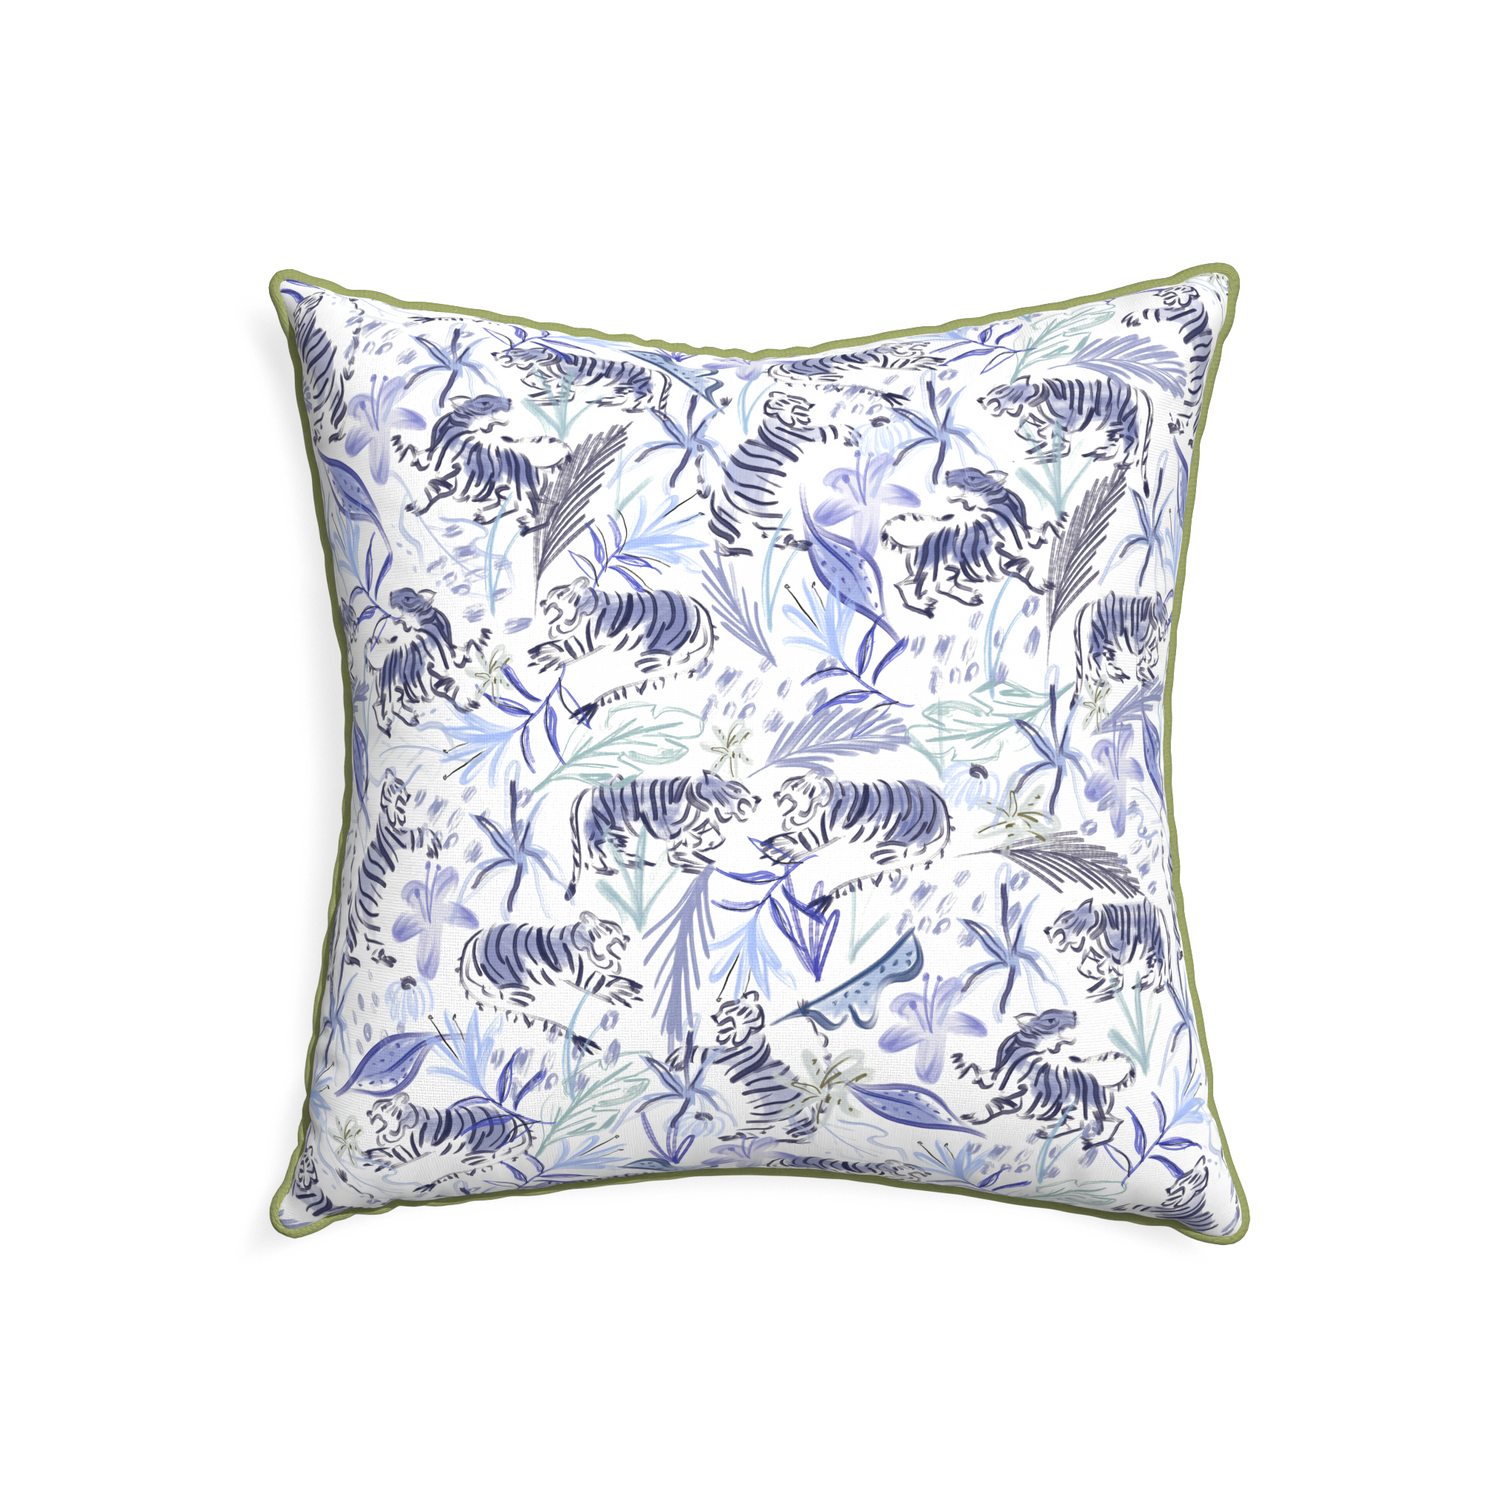 22-square frida blue custom blue with intricate tiger designpillow with moss piping on white background